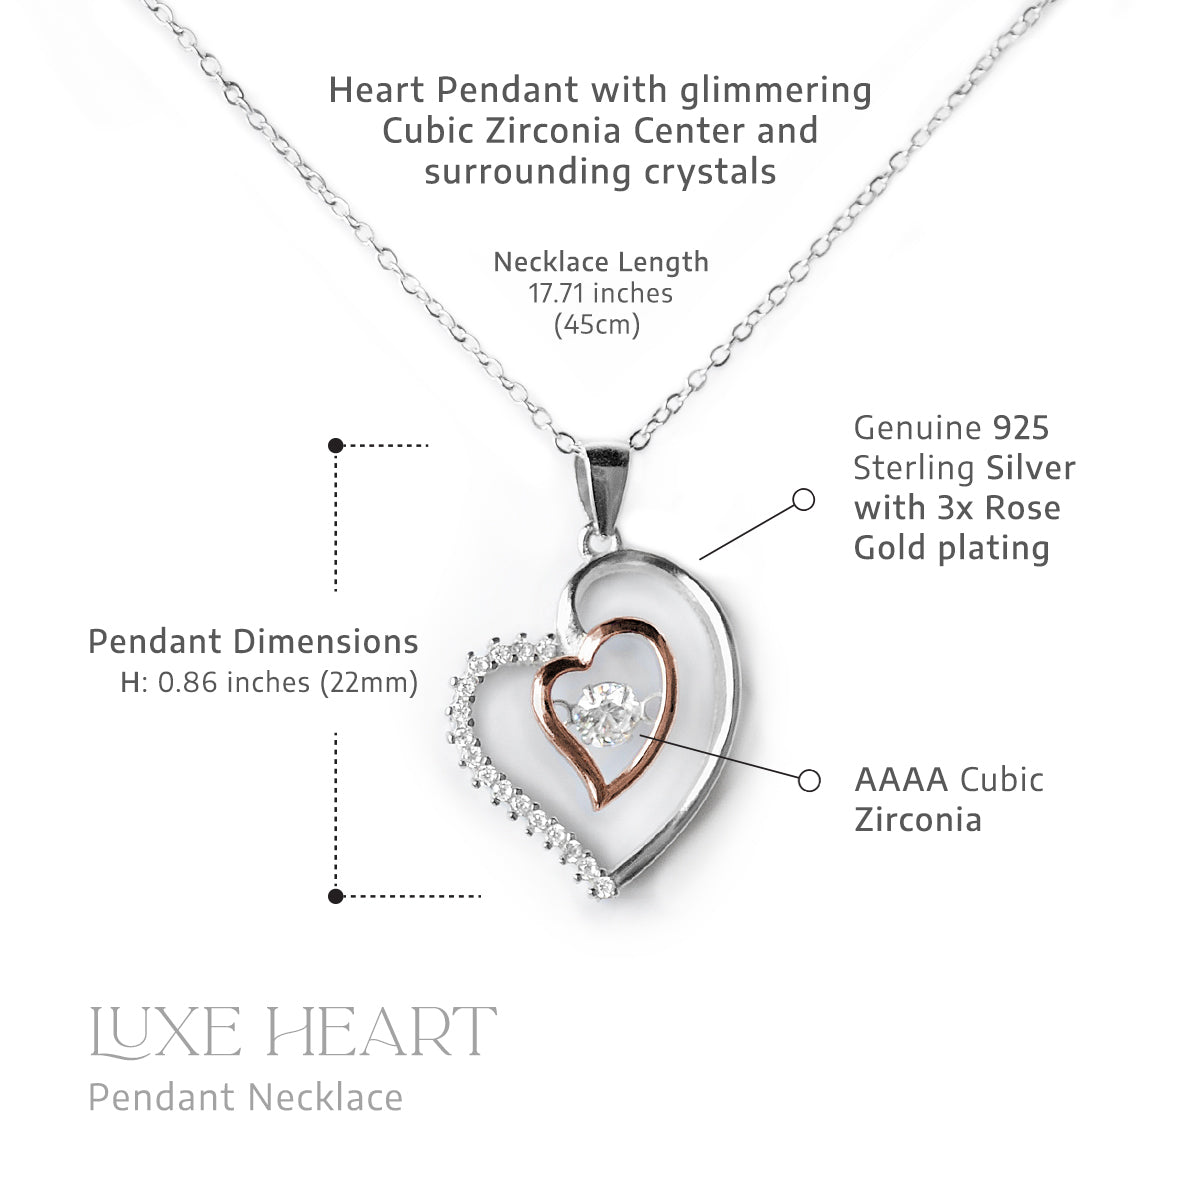 To My Snow Princess, From Dad - Luxe Heart Necklace Gift Set